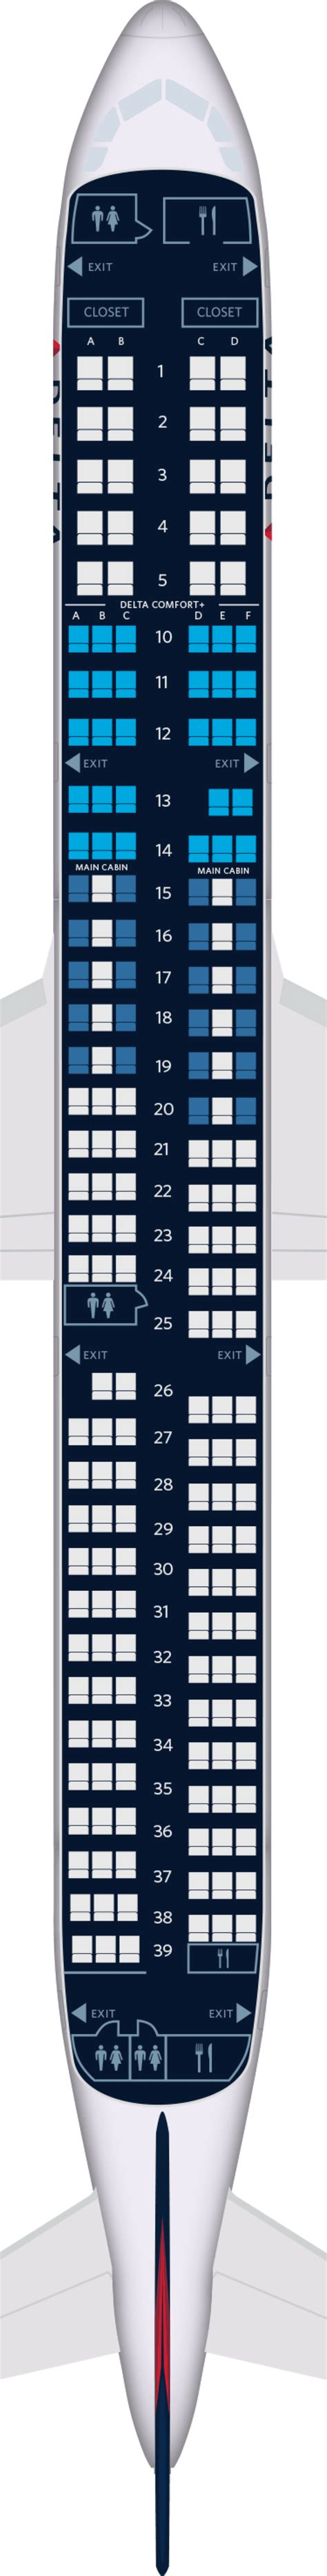 Frontier Airlines Seating Chart Airbus A321 Review Home Decor